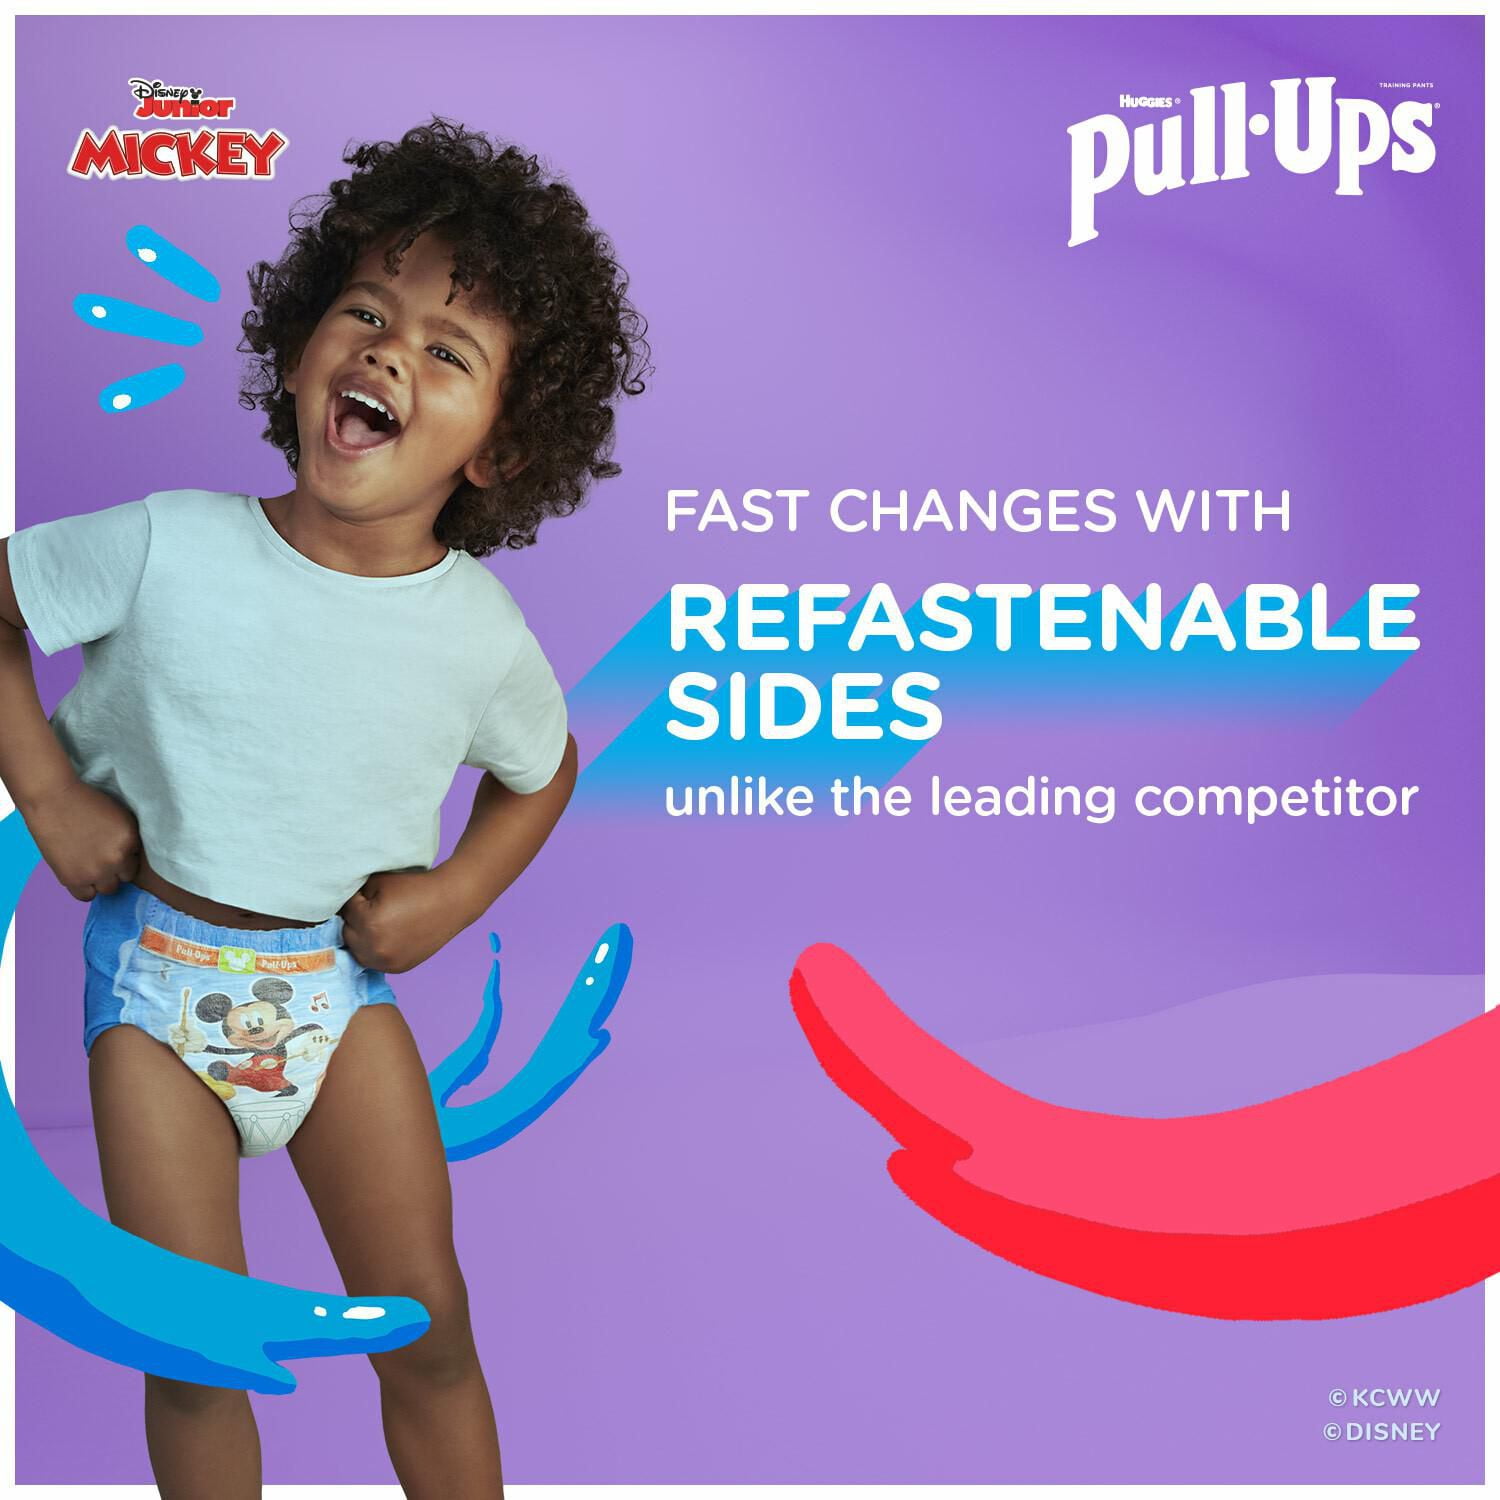 Huggies Pull-Ups New Leaf Training Underwear for Girls 3T-4T 96 Count 